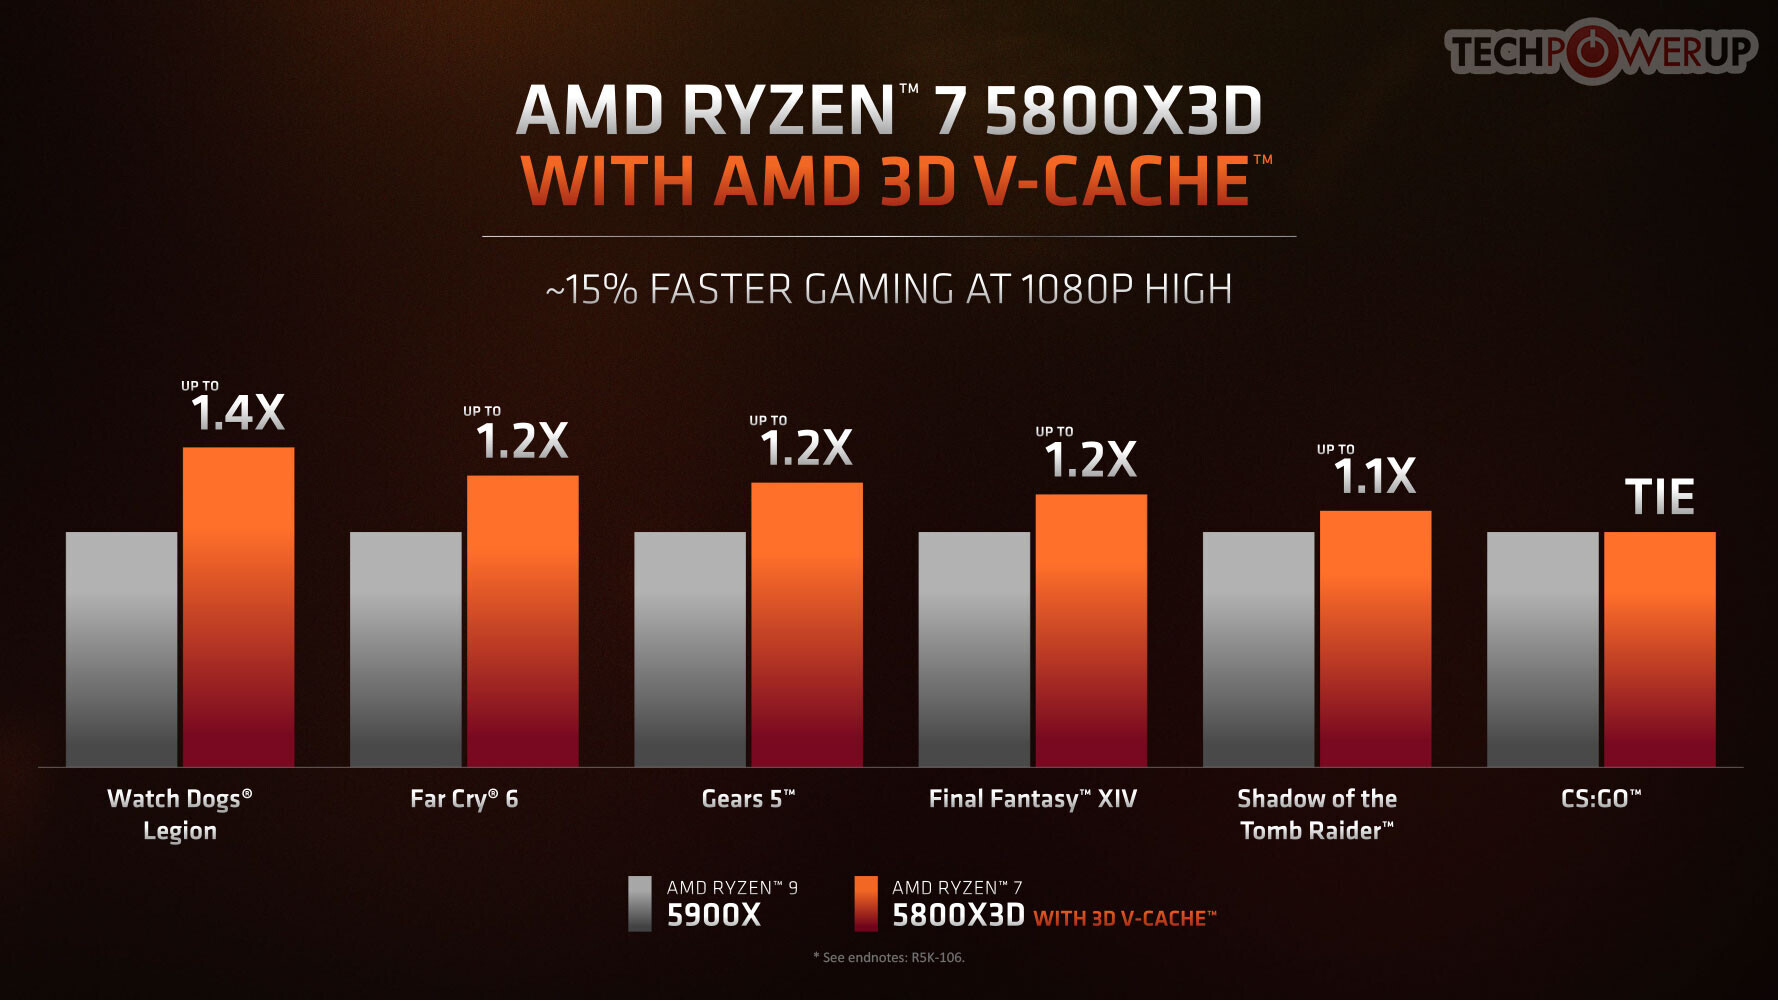 AMD Ryzen 5 5600X3D CPU Review & Benchmarks: Last Chance Upgrade